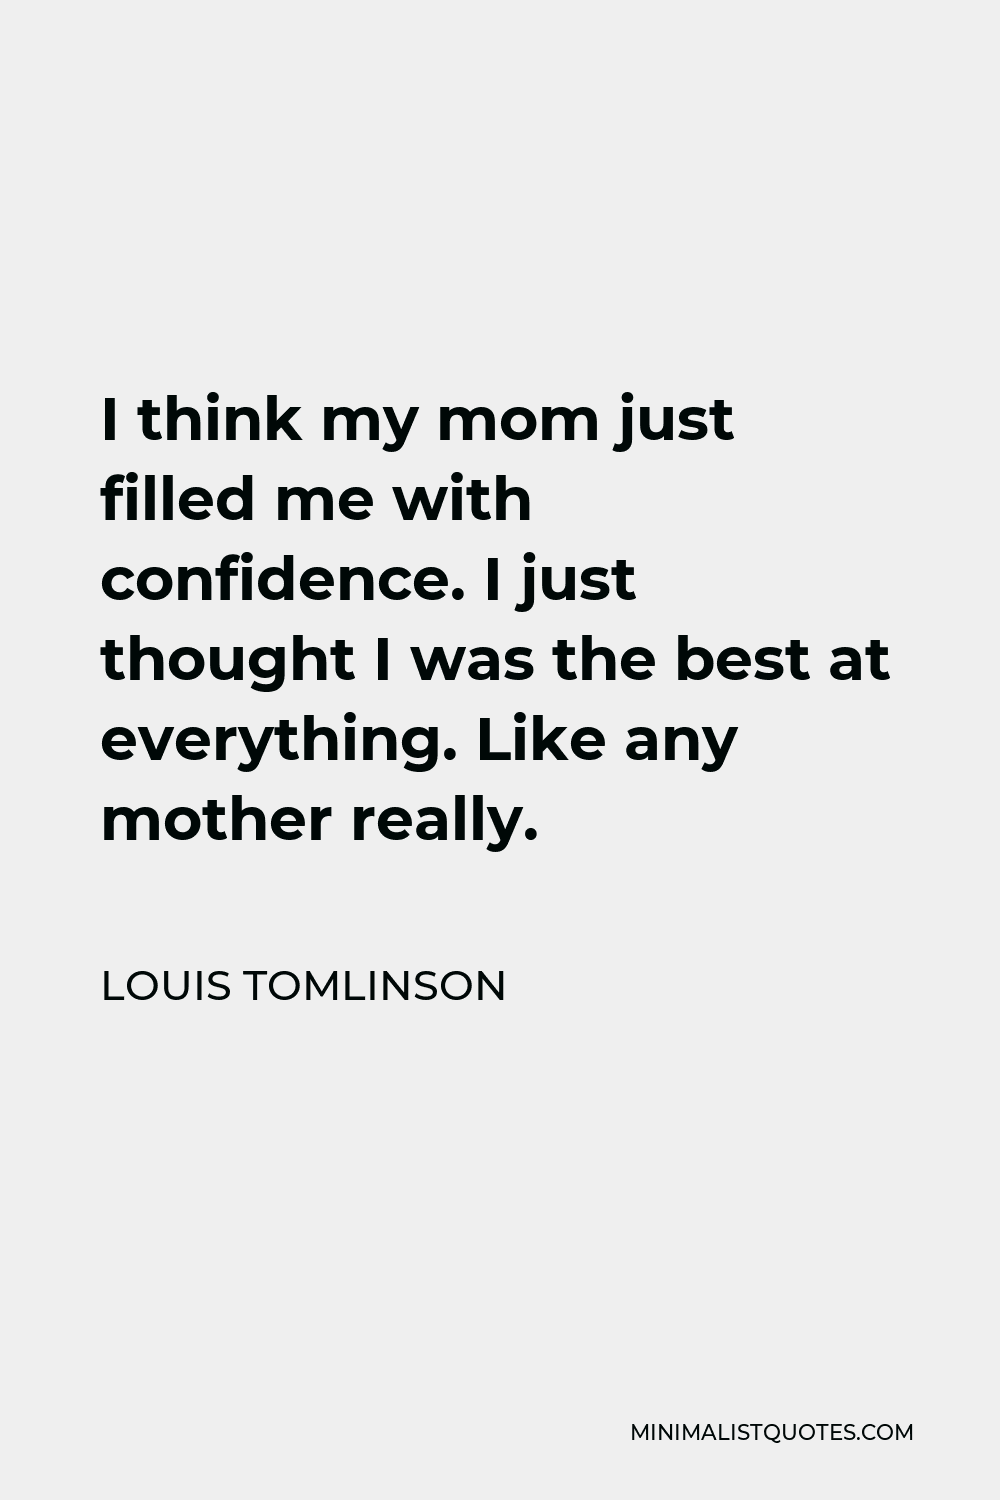 Louis Tomlinson Quote - I think my mom just filled me with confidence. I just thought I was the best at everything. Like any mother really.